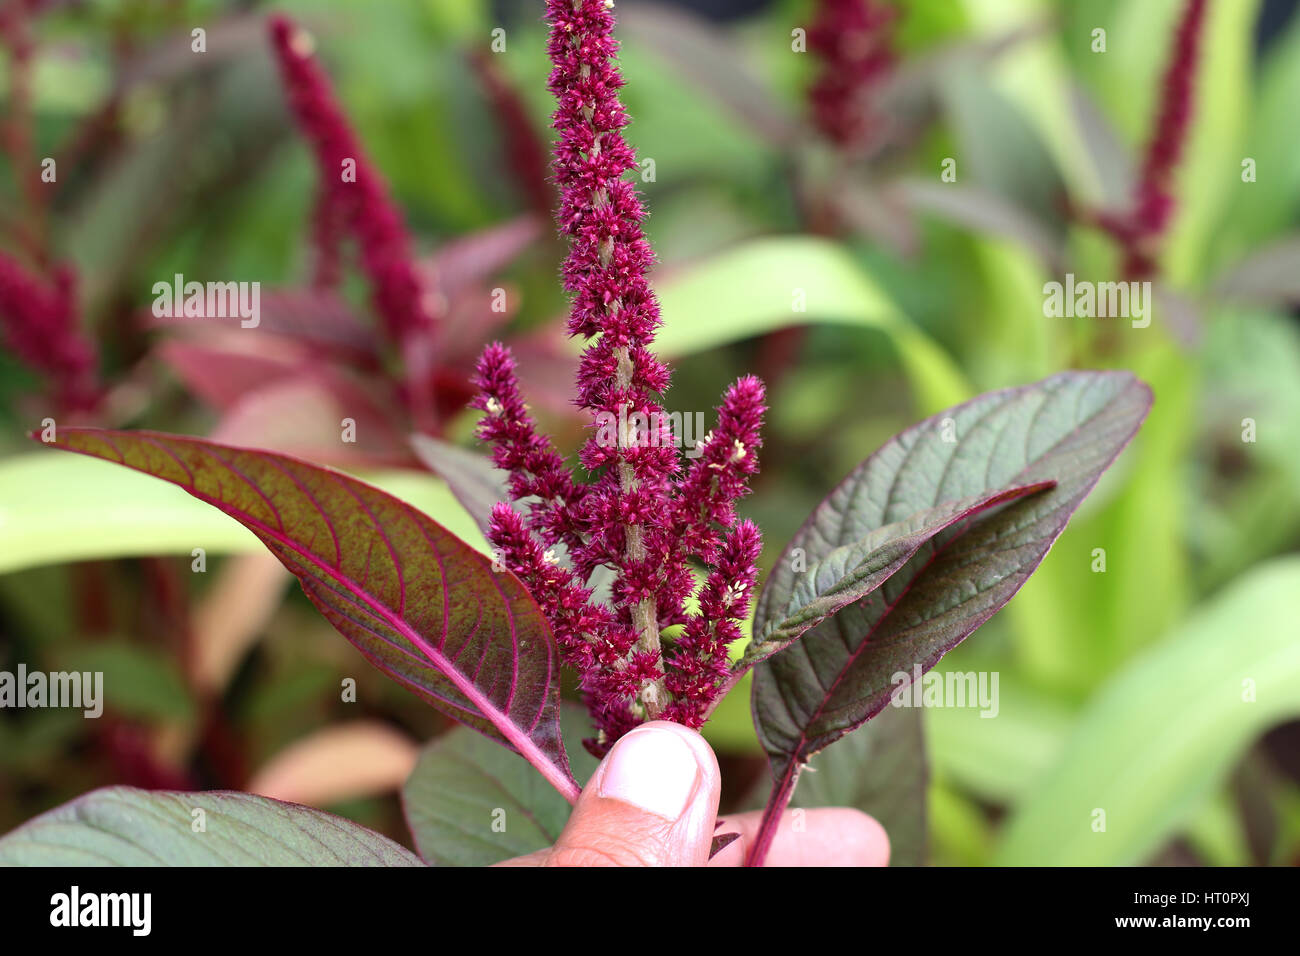 Amaranthus tricolor or known as Red Amaranth Stock Photo